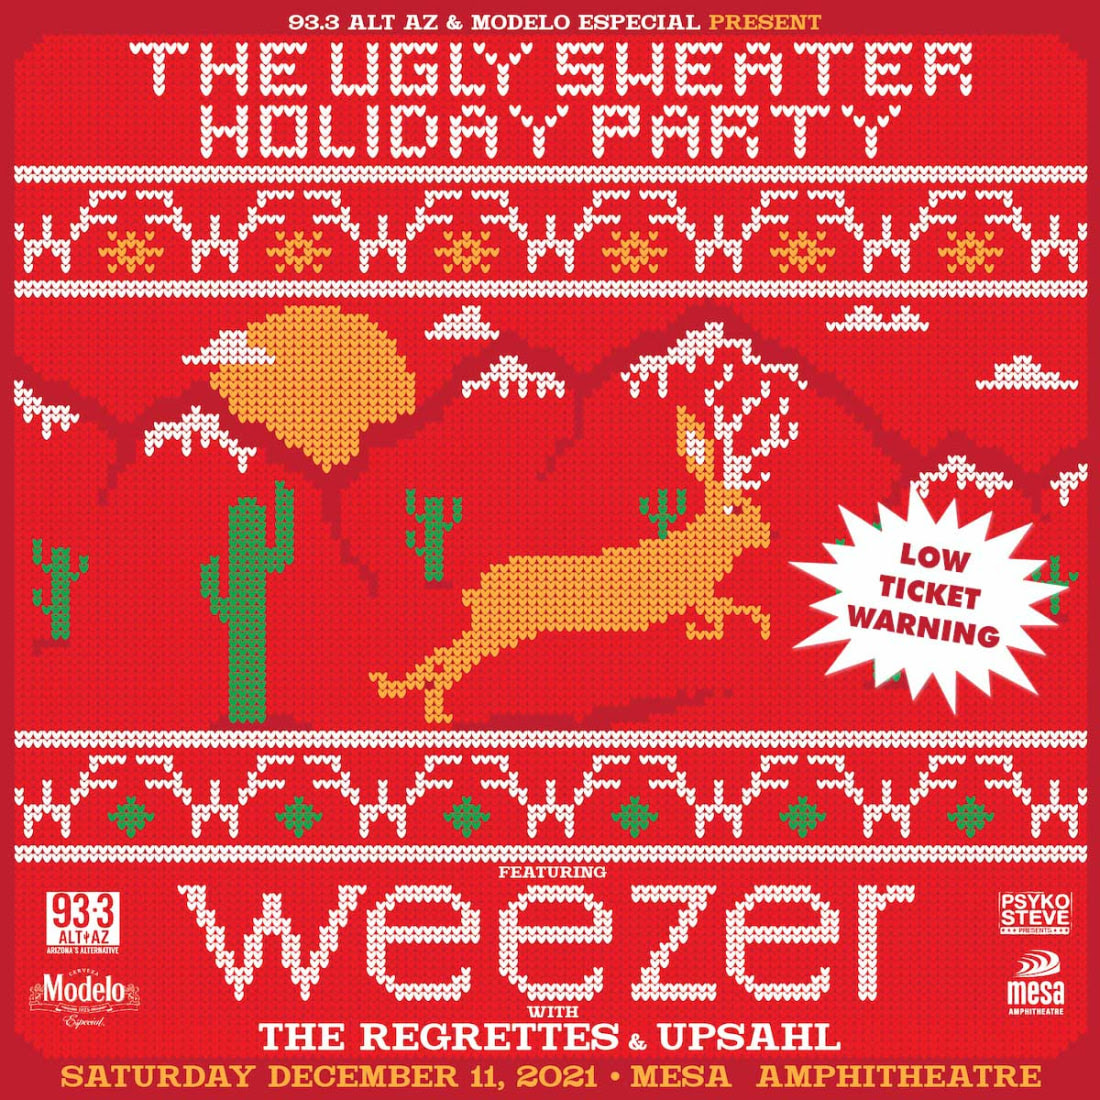 On Sale Now - Weezer, The Menzingers, Knuckle Puck, Uncle Acid, The Warning, and more